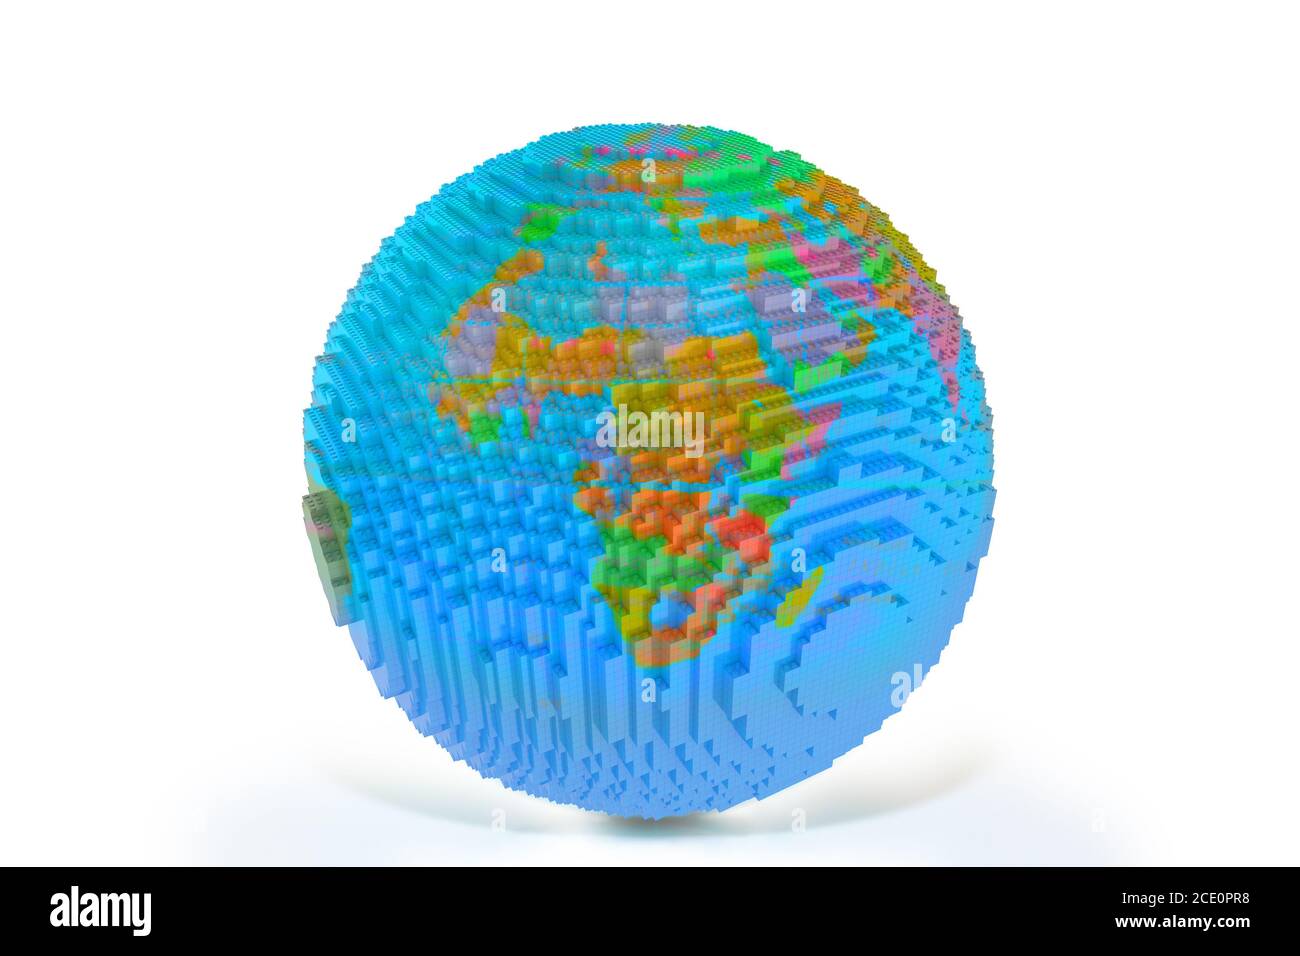 world globe isolated on white background, made of plastic construction bricks. European and African face of the planet earth. 3D rendering. Stock Photo